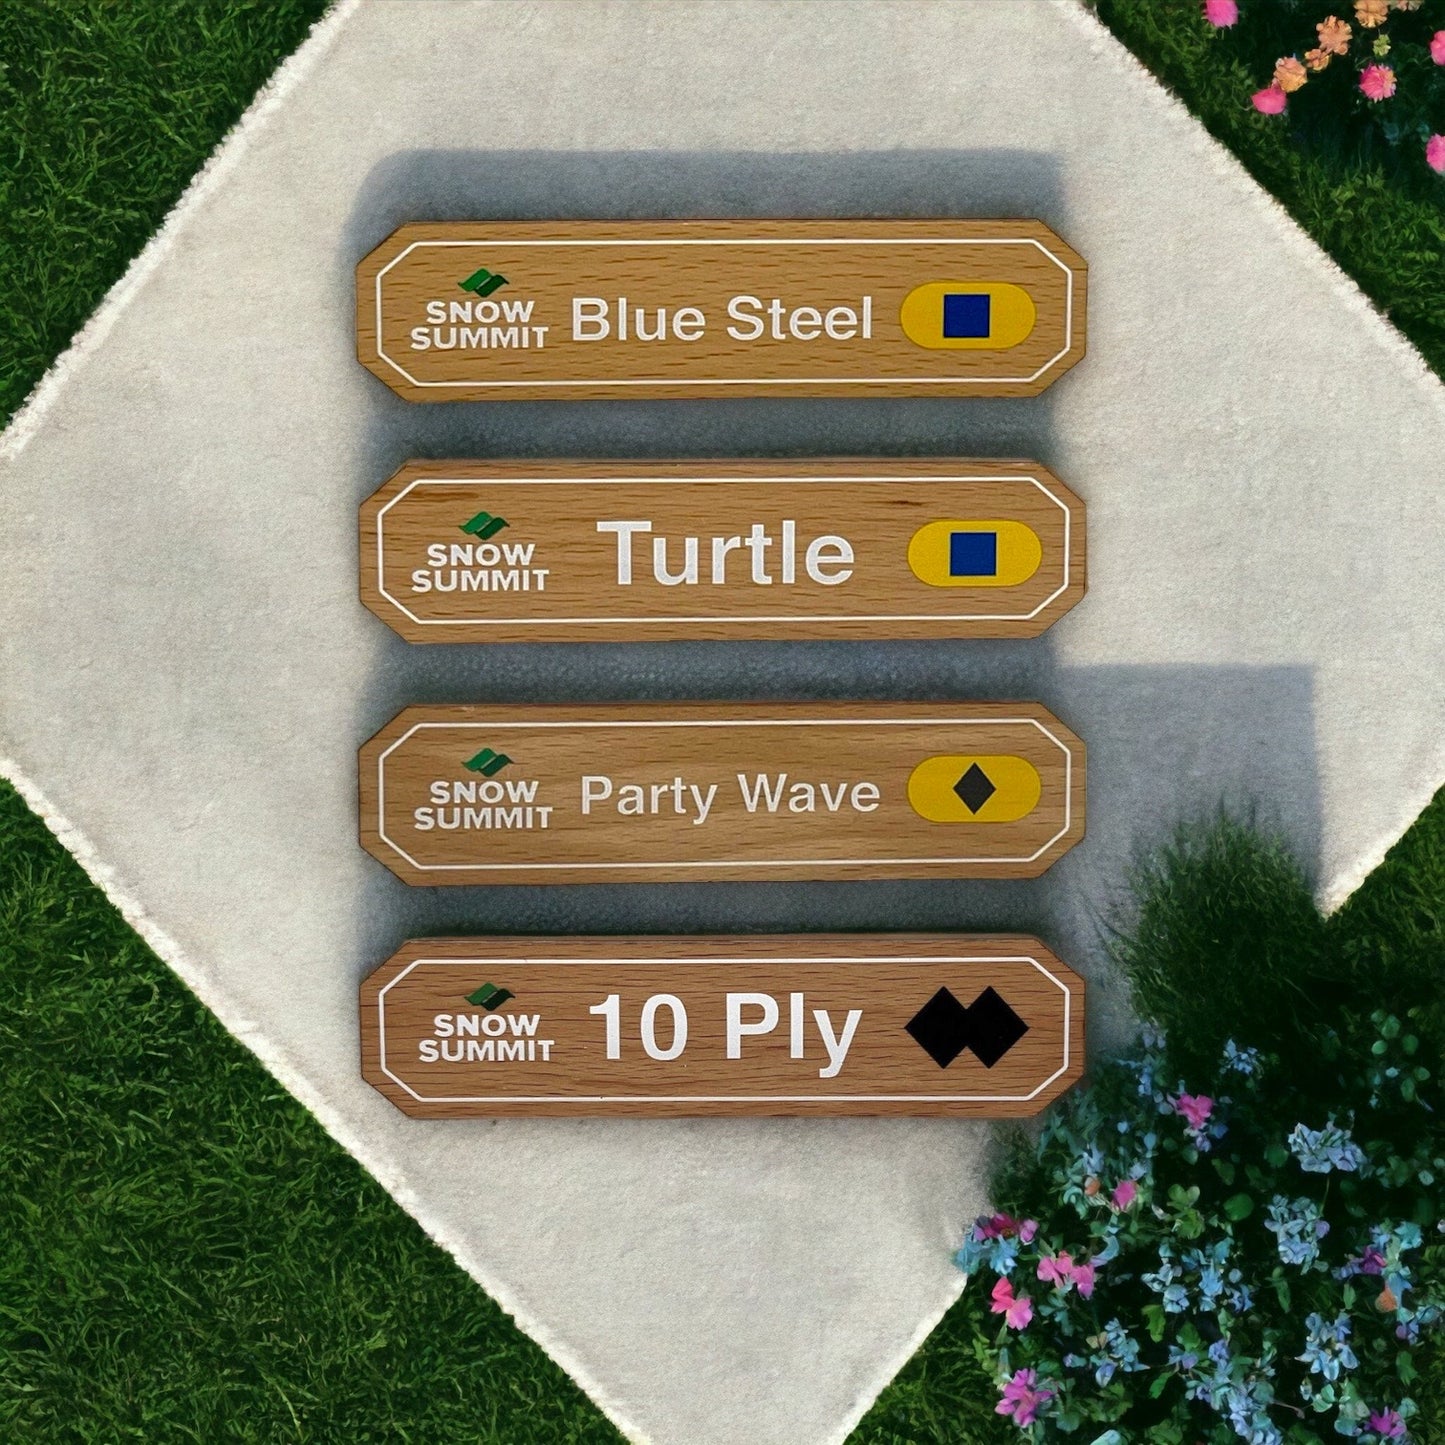 Wooden magnets with a Snow Summit logo on the left and trail signs for: Blue Steel, Turtle, Party Wave, and 10 Ply copy on it with difficulty legend rating